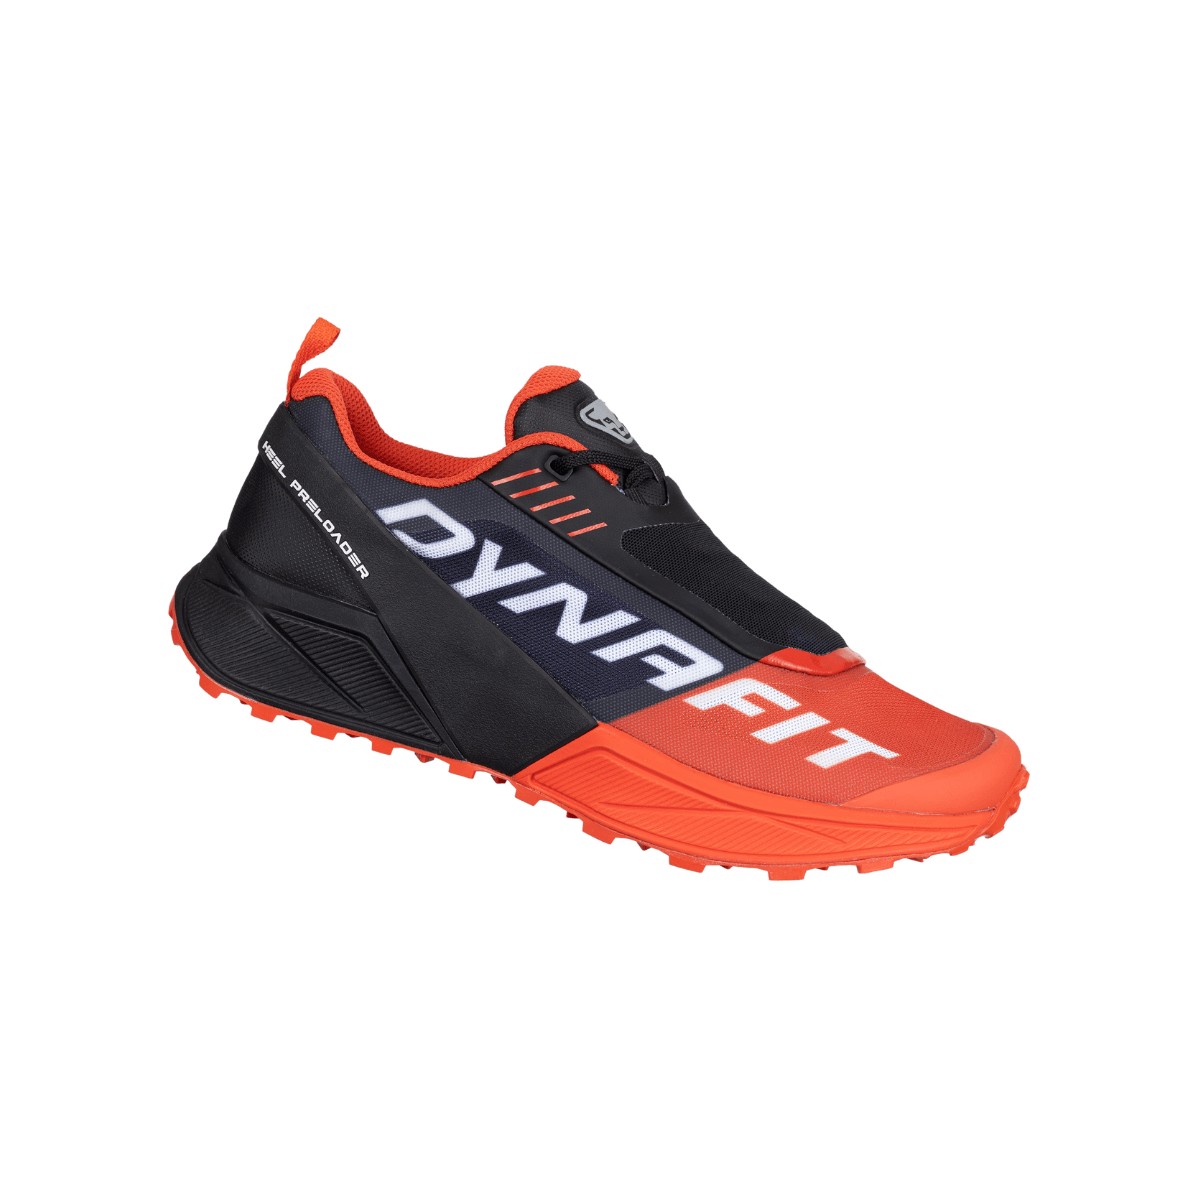 Chaussures Dynafit Ultra 100 Noir Orange AW22, Taille 44,5 - EUR